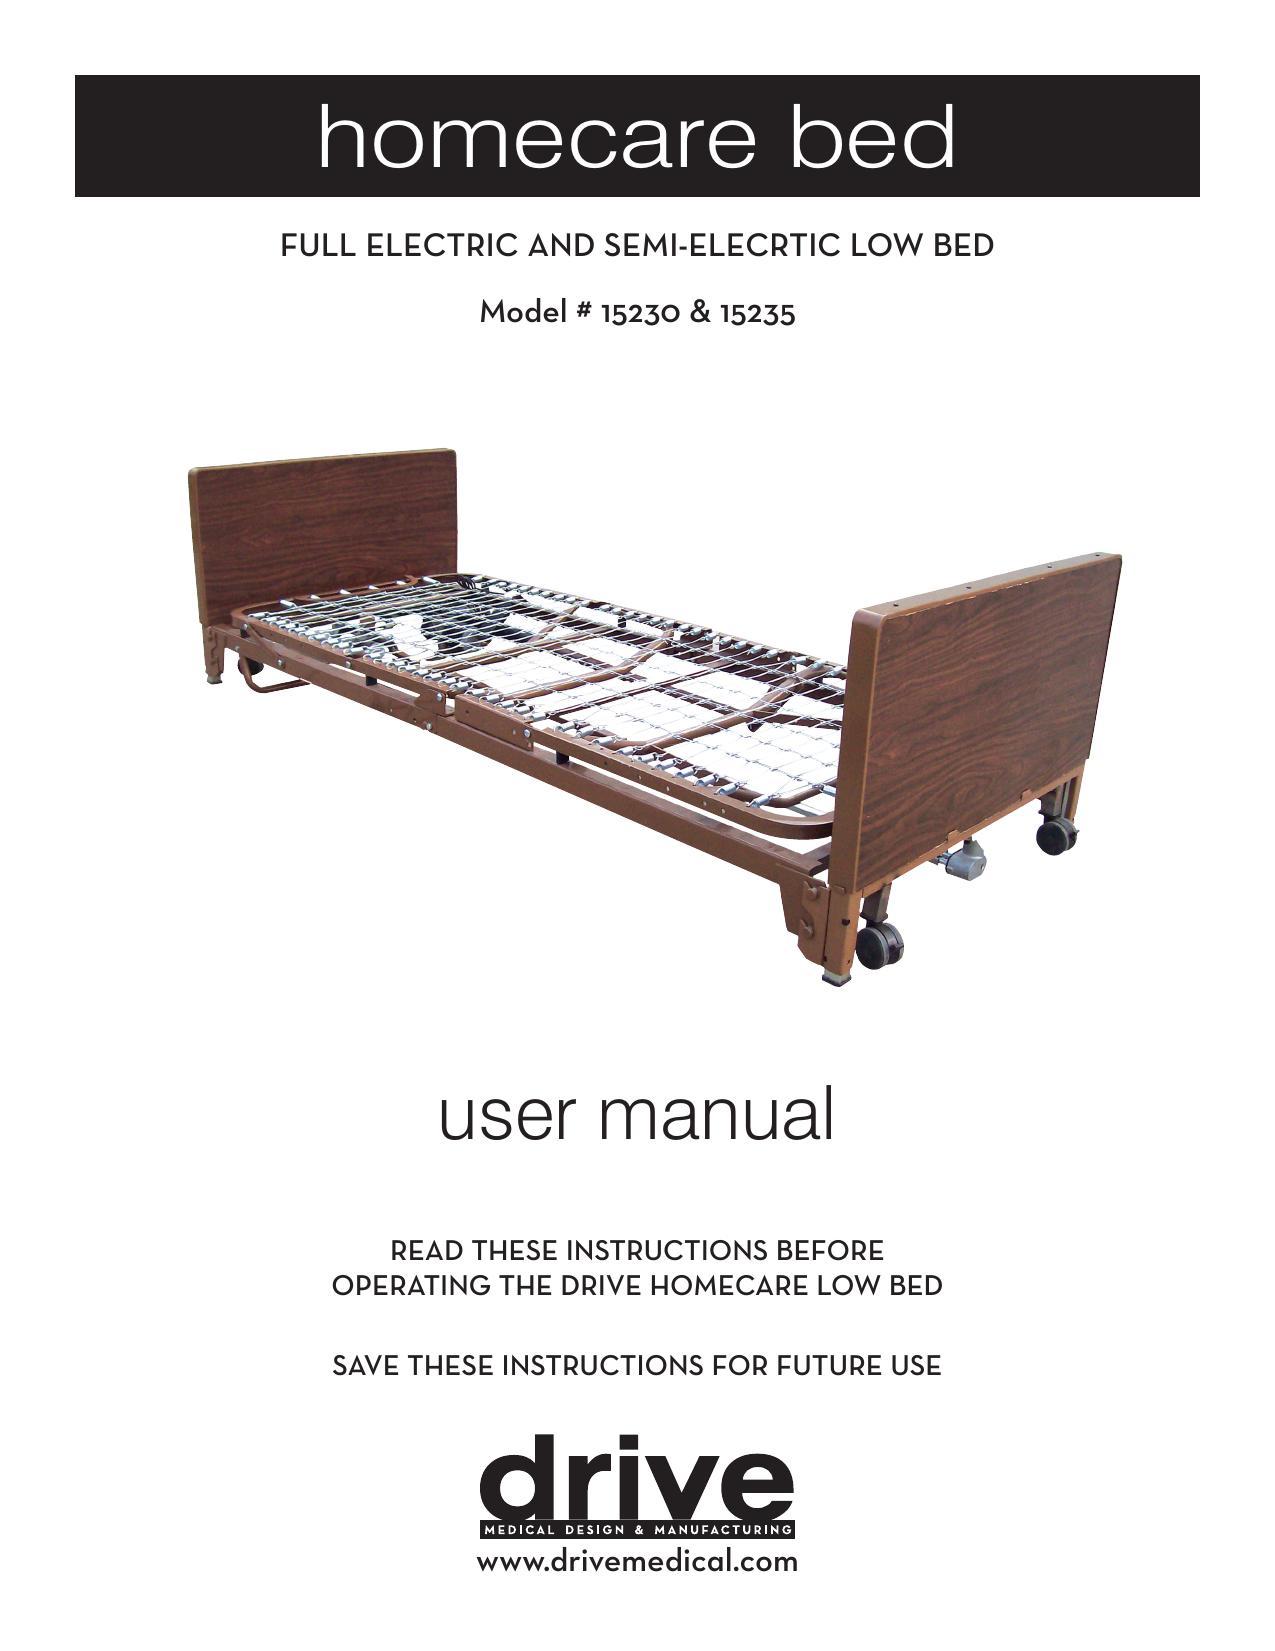 drive-medical-homecare-bed-full-electric-and-semi-electric-low-bed-model-15230-15235-user-manual.pdf